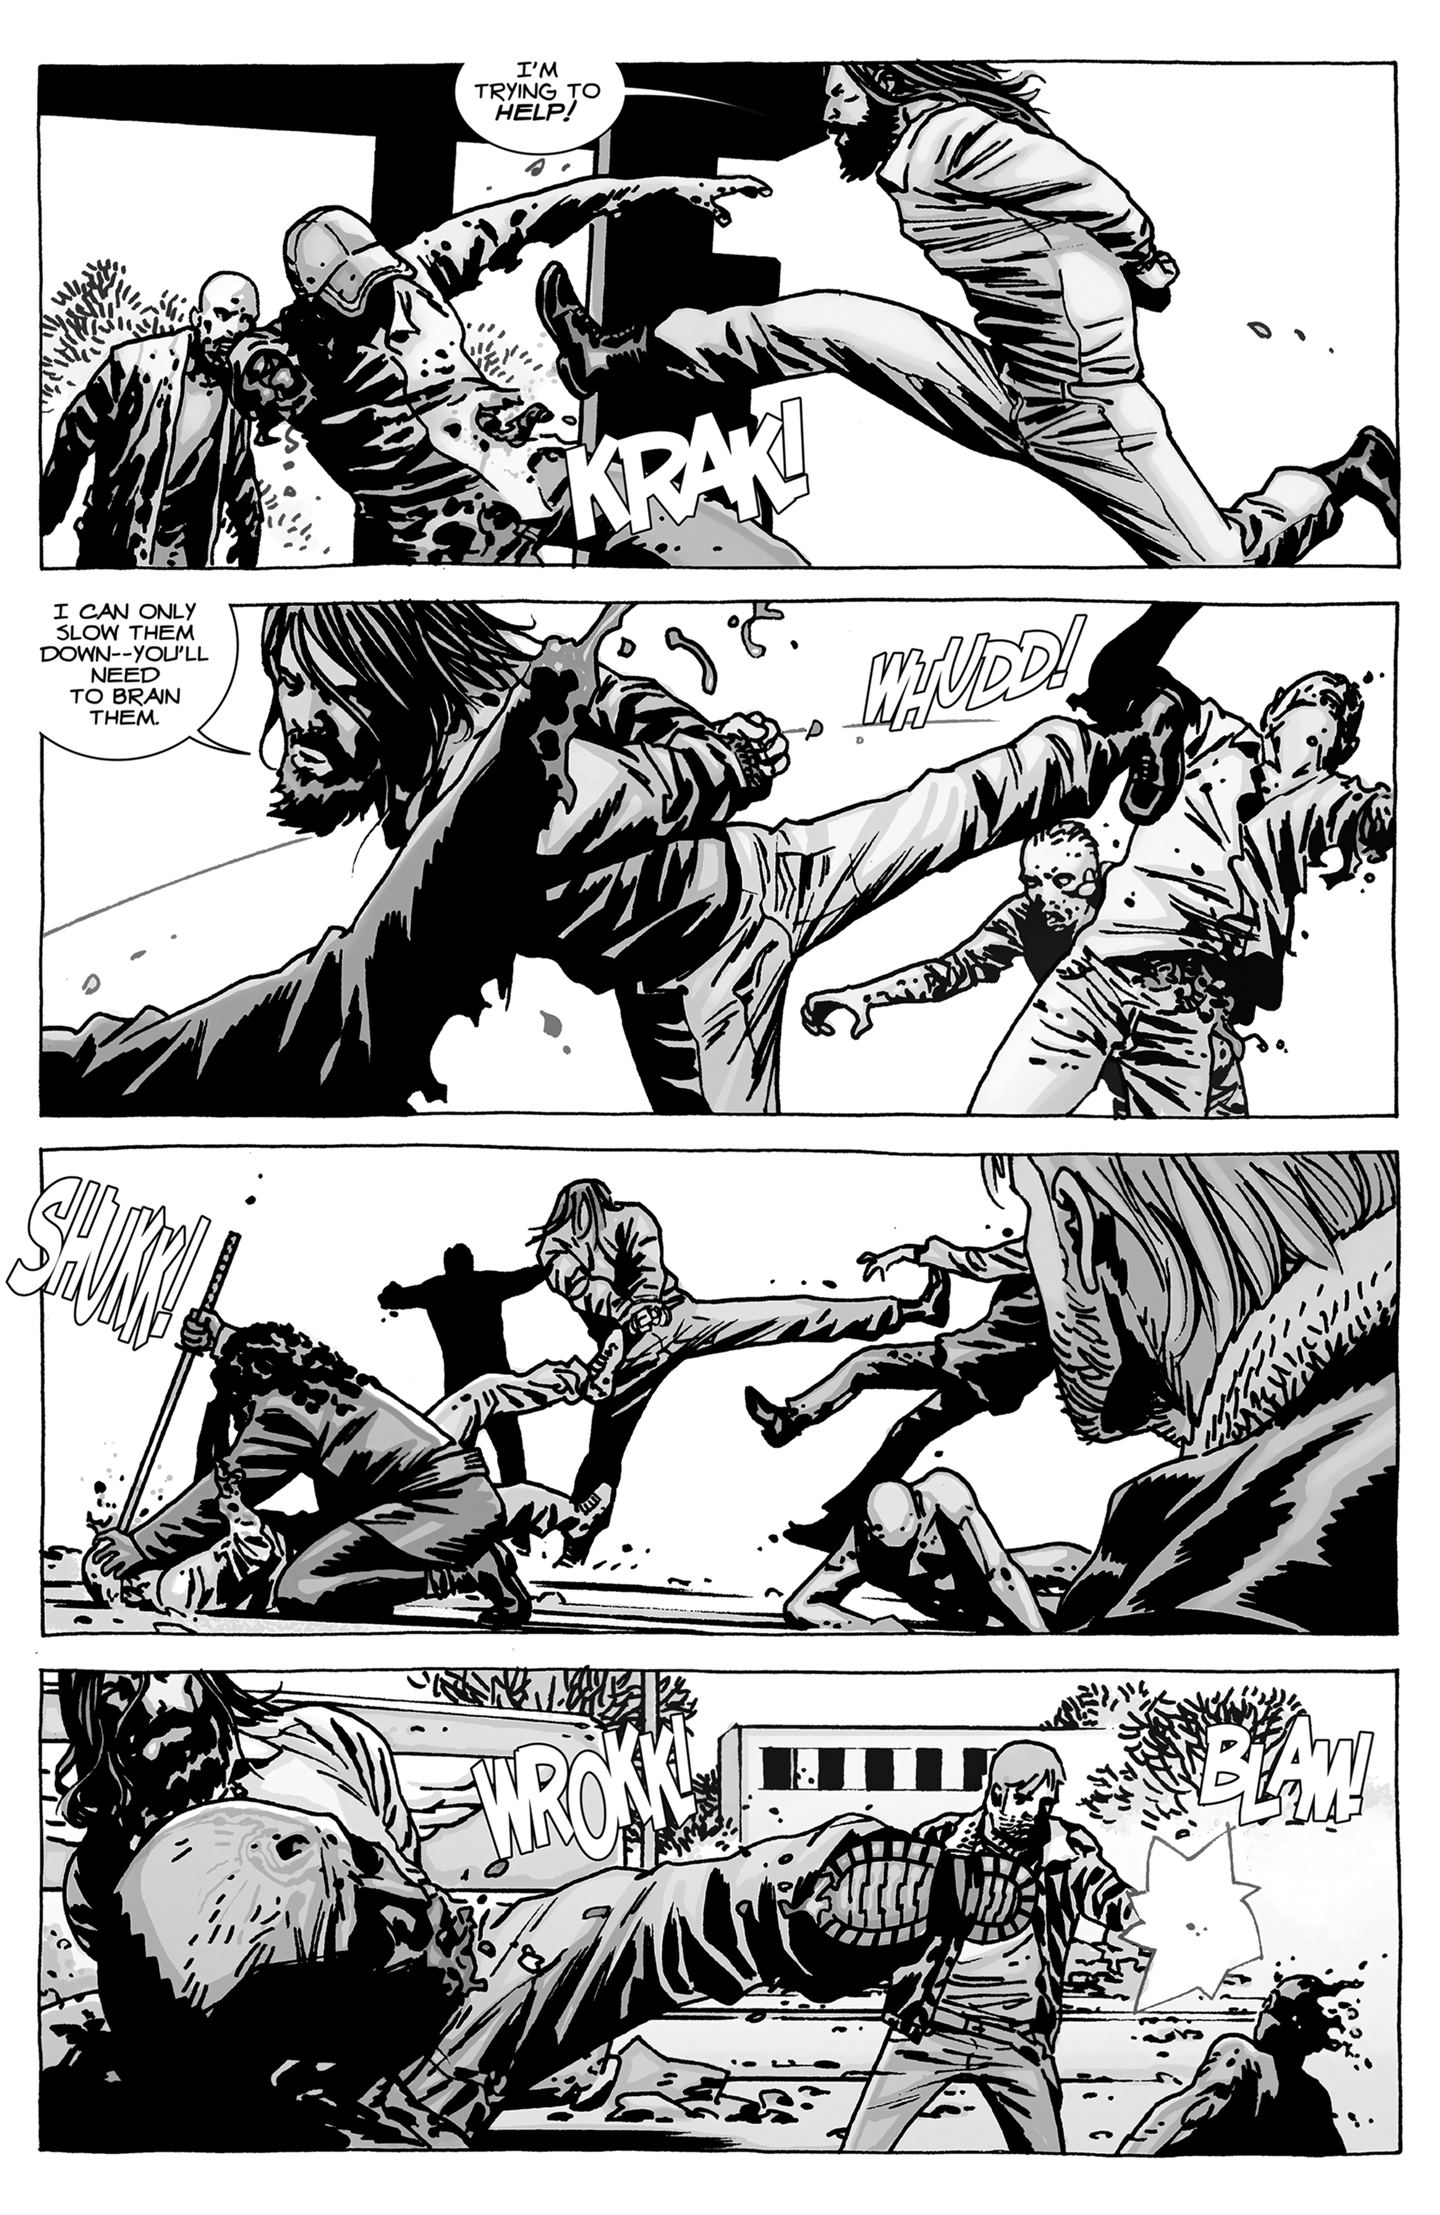 The Walking Dead 94 - A Larger World, Part Two